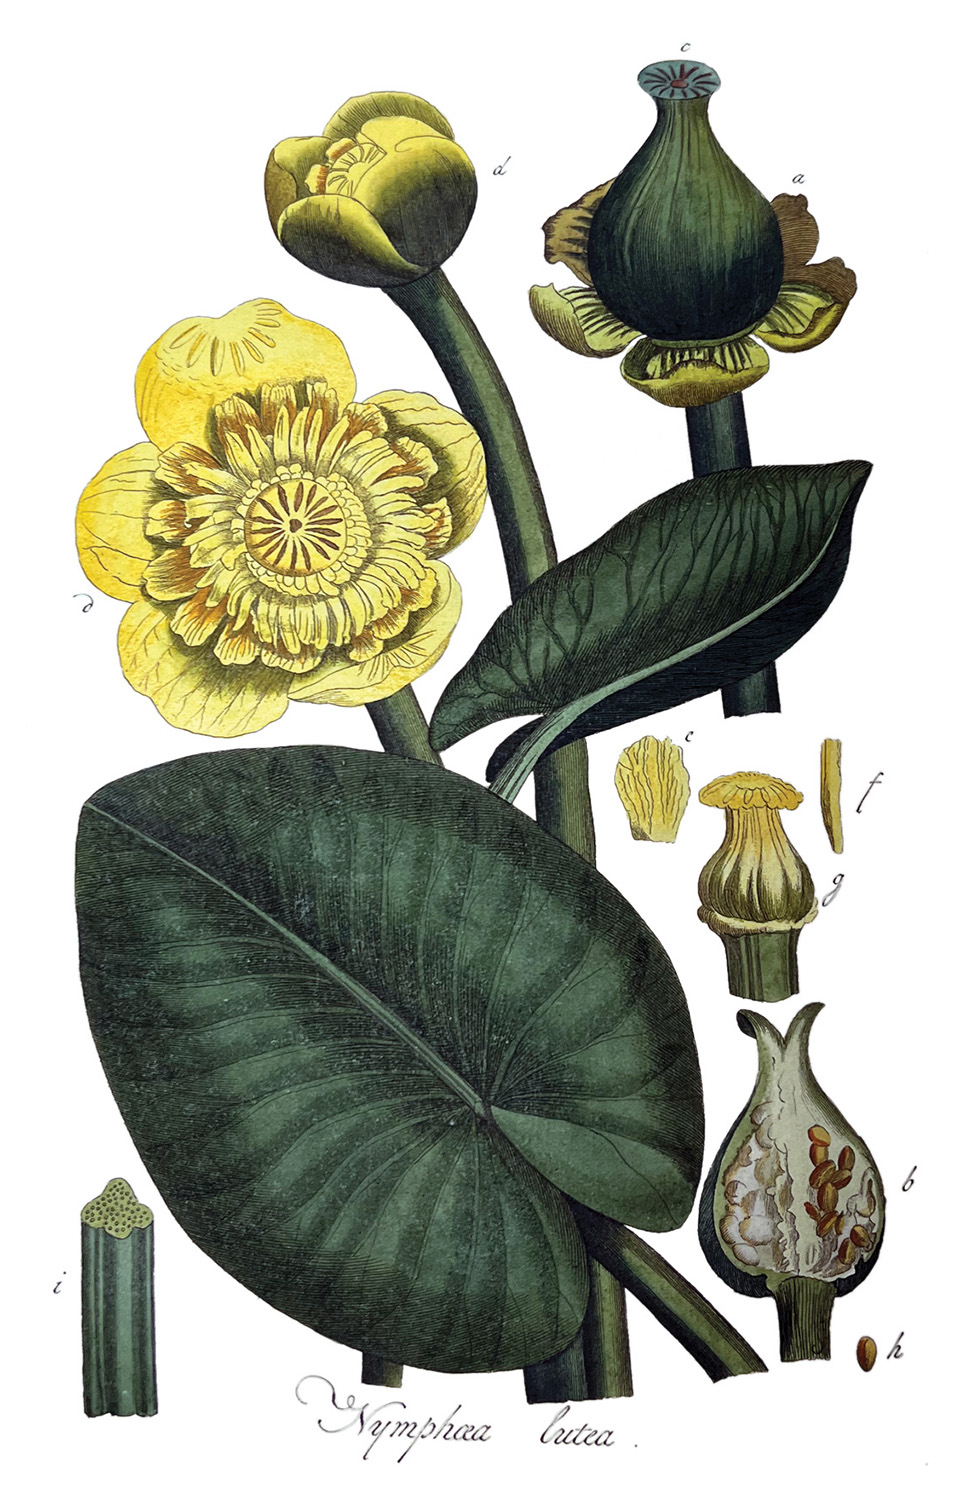 Colored botanical illustrations of a yellow flower, including its leaves, stem, and fruiting body. The flower has five large outside petals and many interior petals. The image shows the flower in several stages of development, including budding, flower, and fertilization. The leaves are large and fat. The stem is shown in a cross section and is comprised of smaller shafts. The fruiting body is also shown in a cross section, which illustrates seed development. 